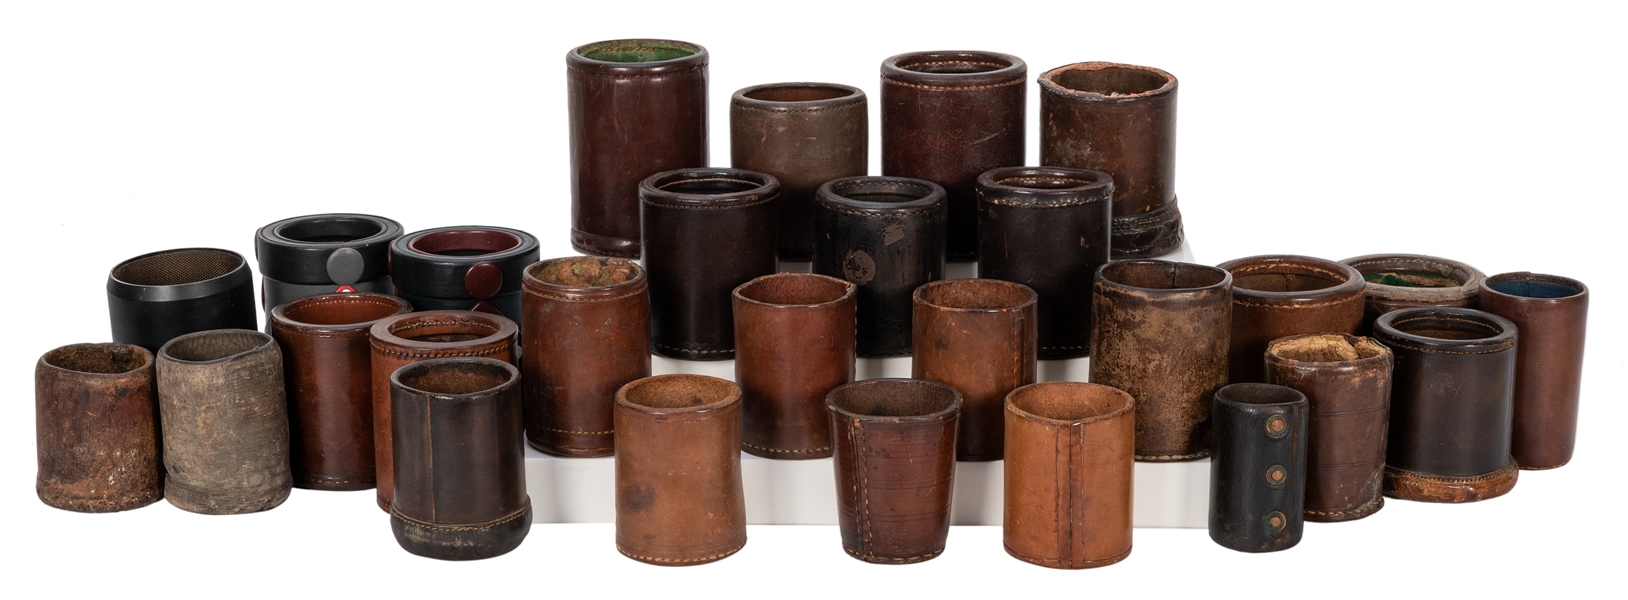  Lot of Over 30 Leather Gambling Dice Cups.